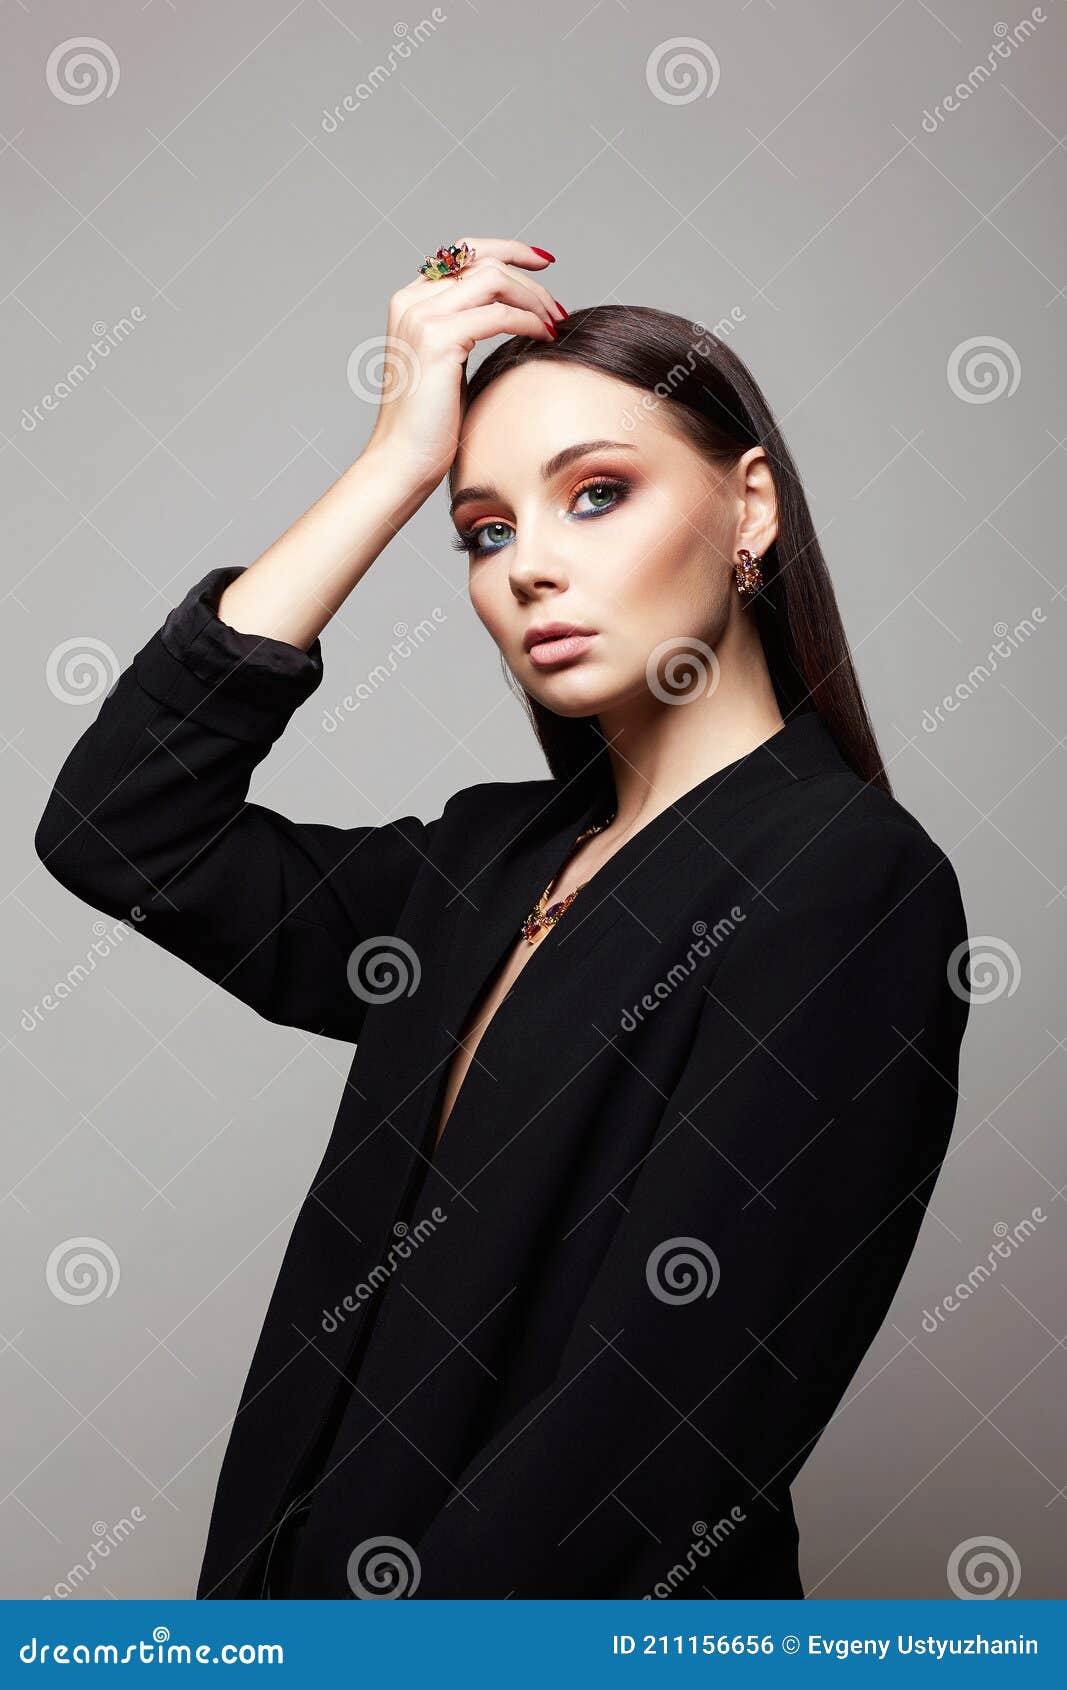 Fashion Portrait of Beautiful Woman in Jewelry Stock Photo picture